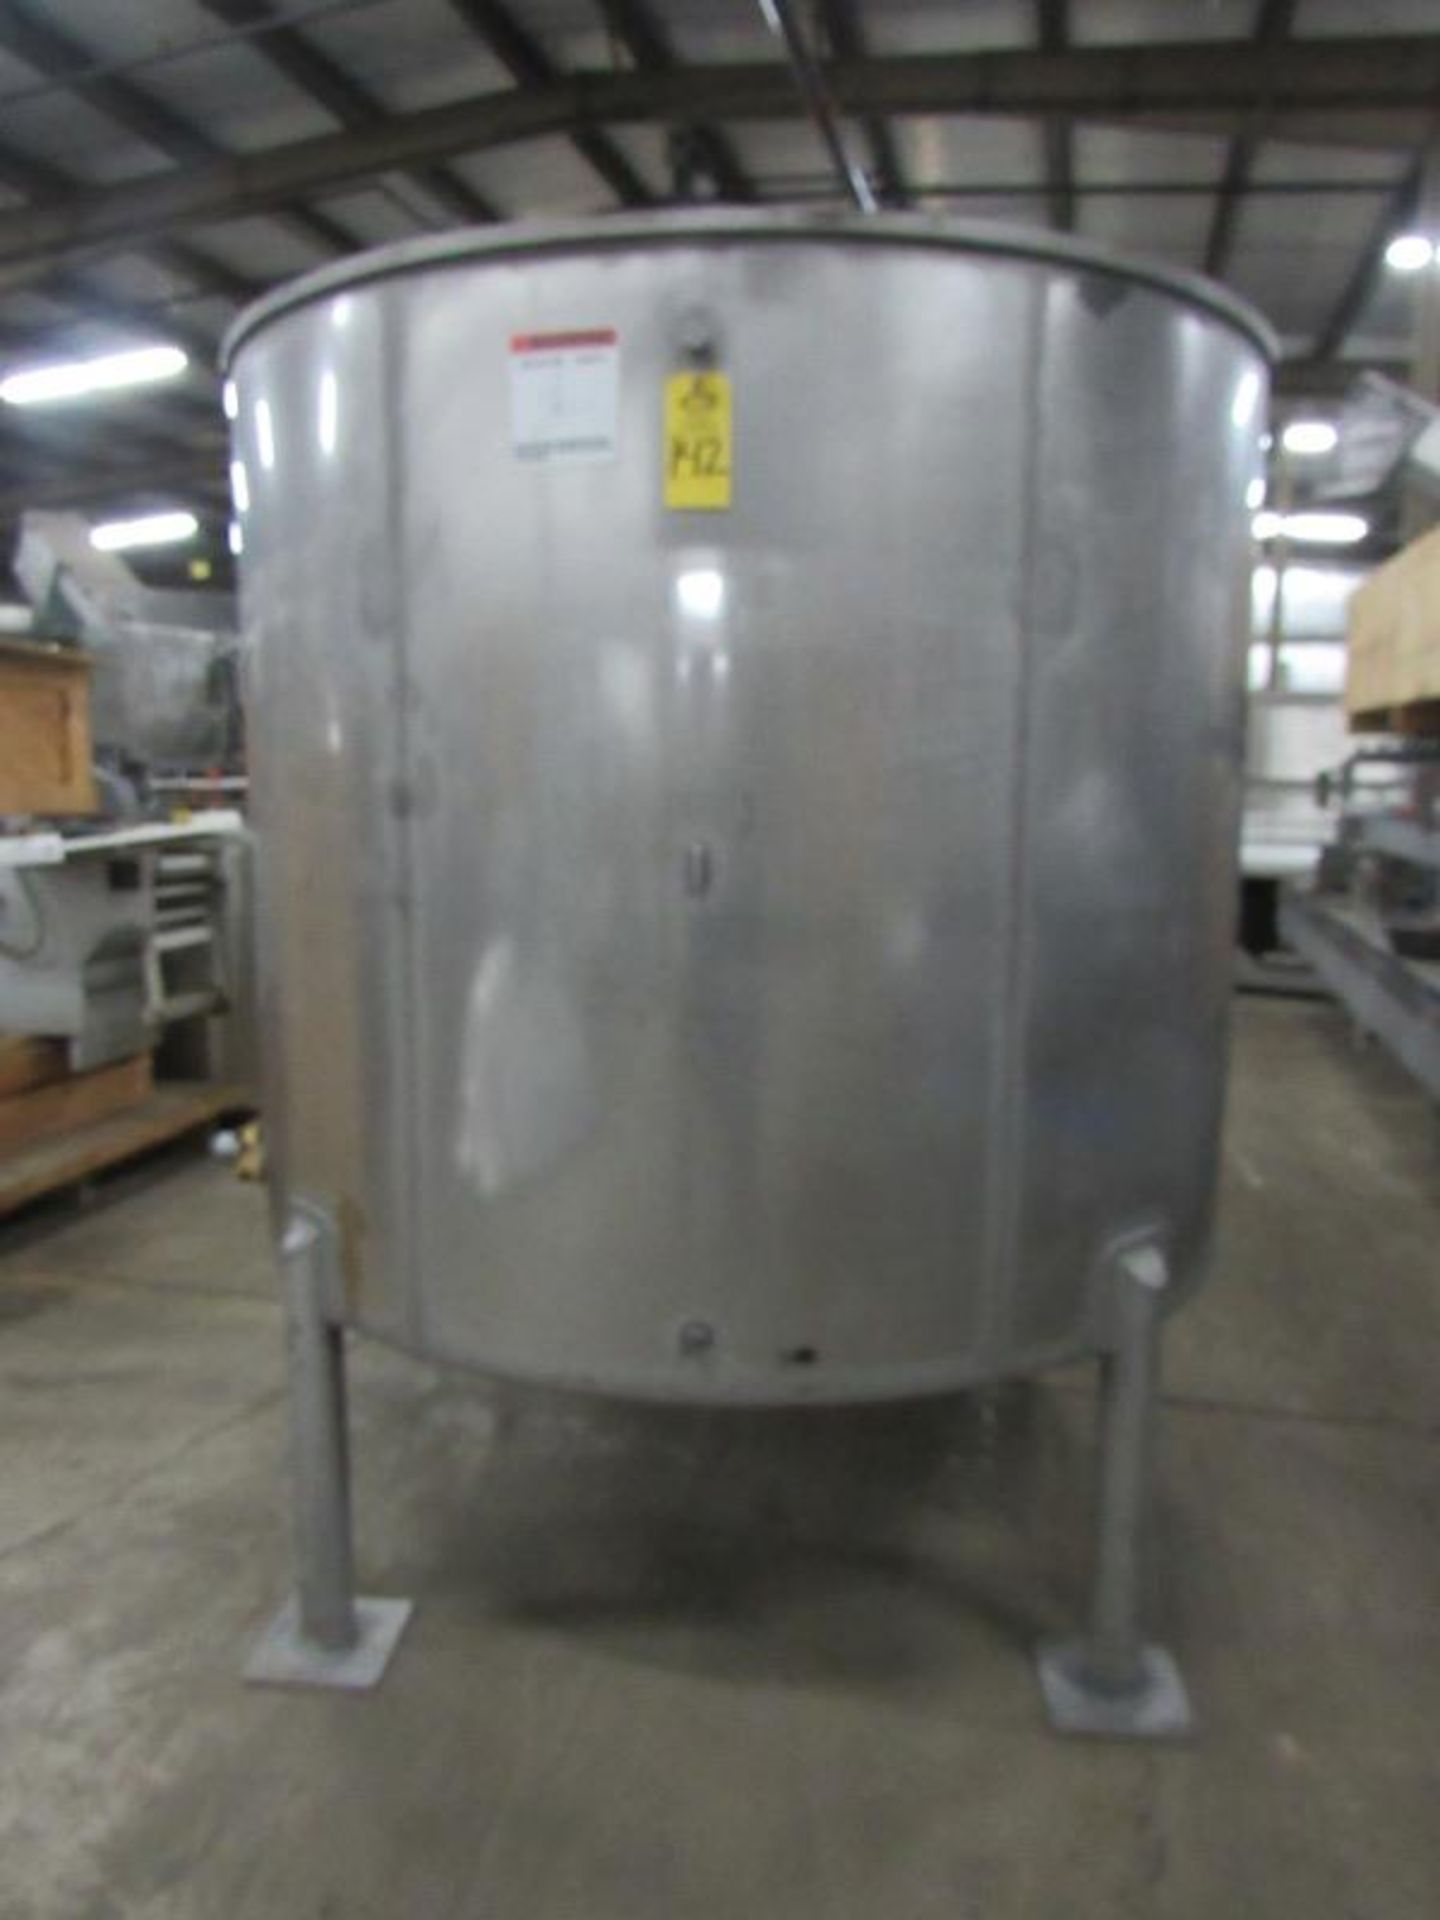 Letsch Stainless Steel Single Wall Tank, 72" dia. X 60" deep cone bottom, (3) stainless steel